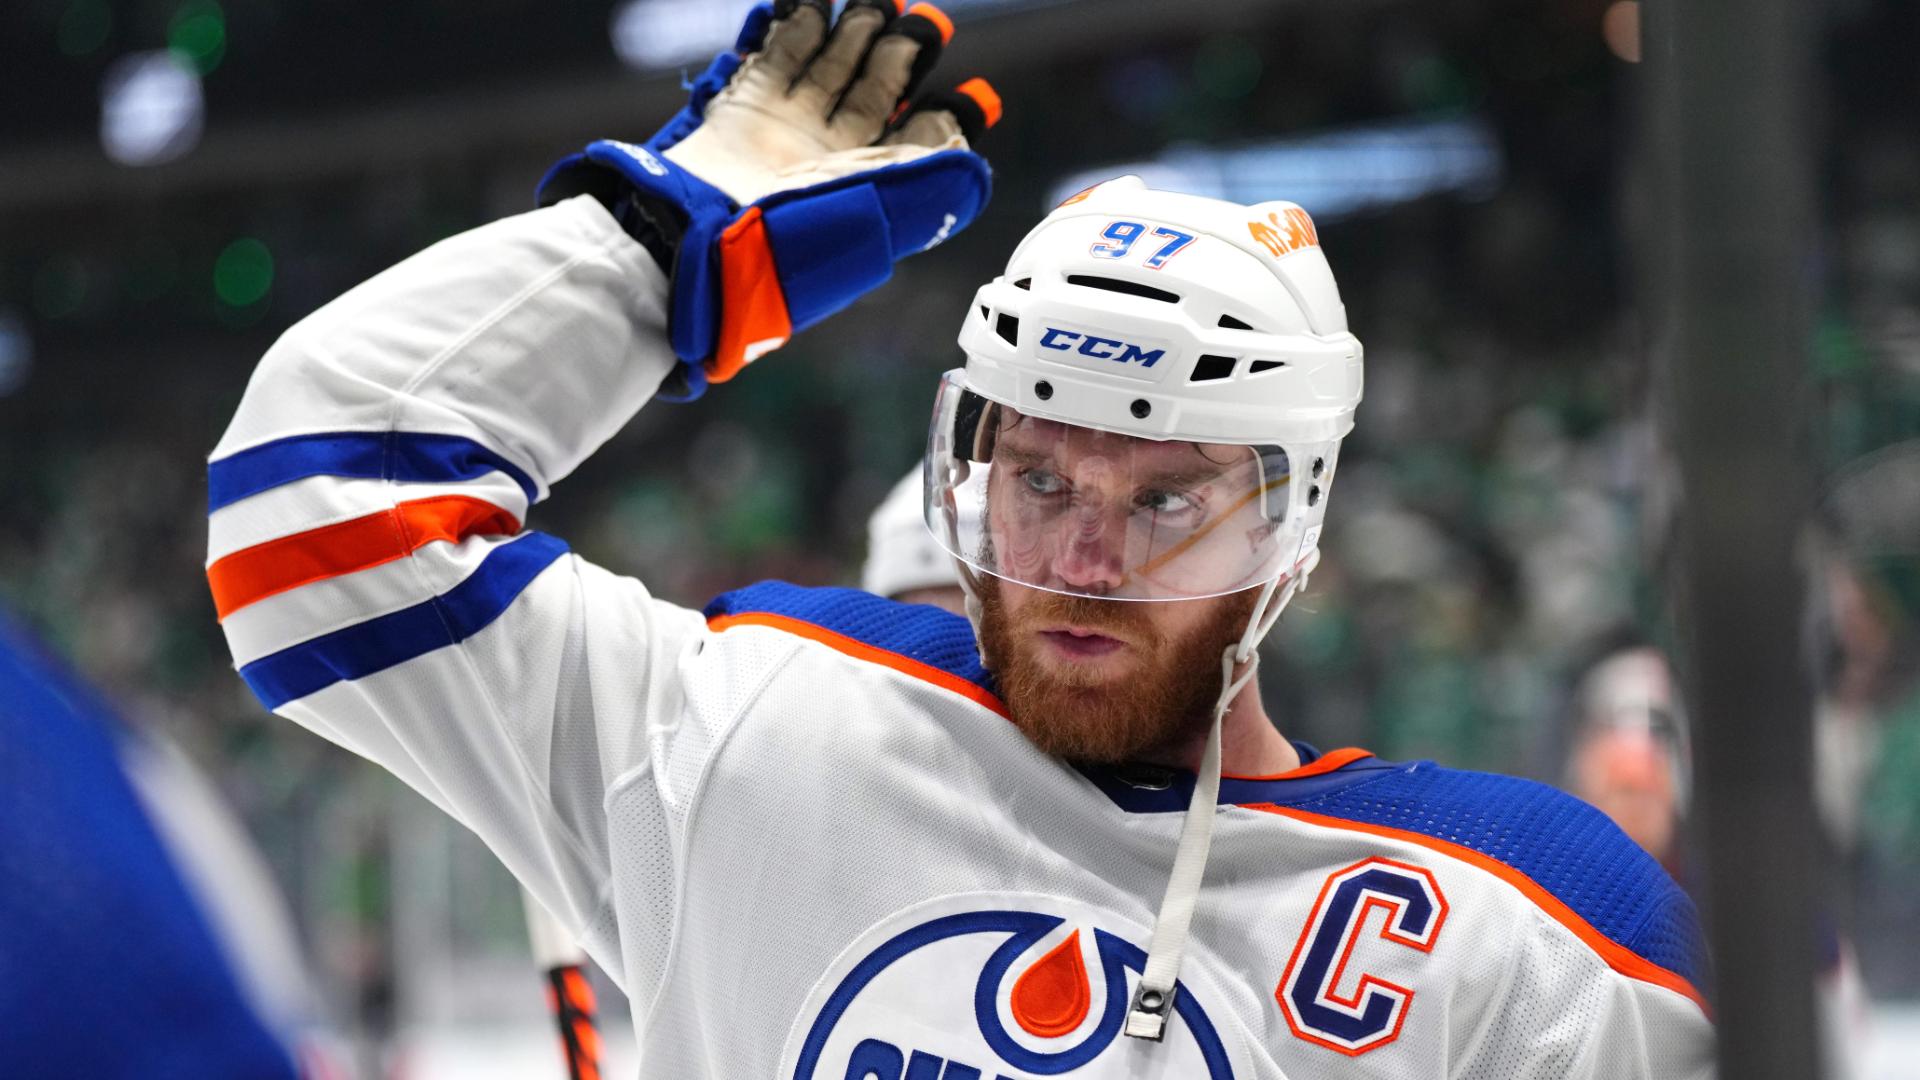 Connor McDavid wins it in 2OT as Oilers take Game 1